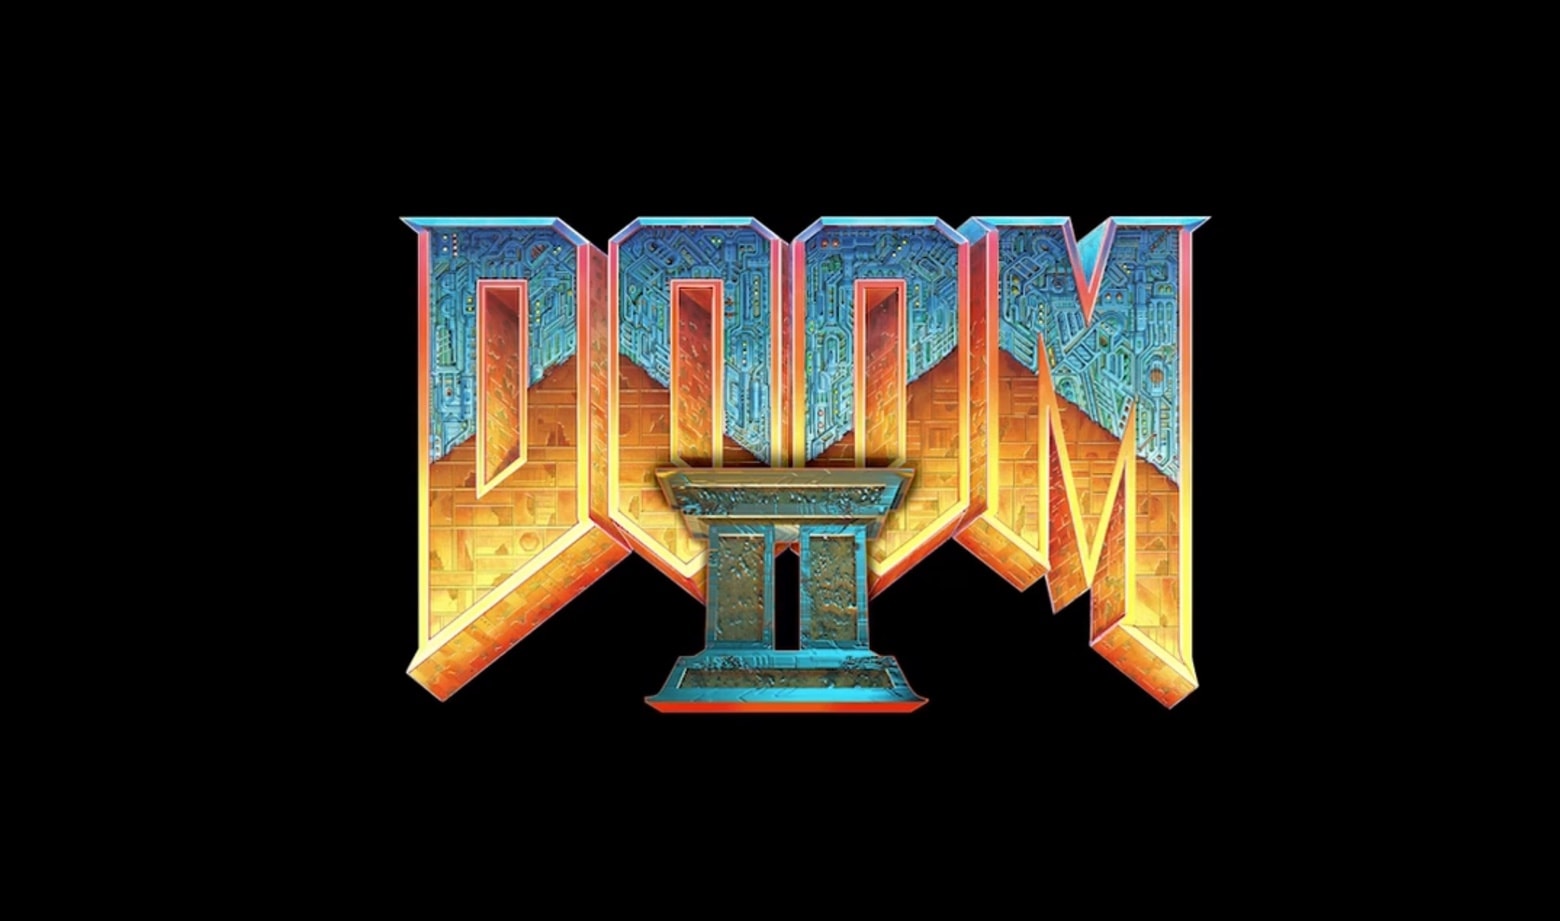 Doom II is back, and this time it’s for iPhone and iPad.